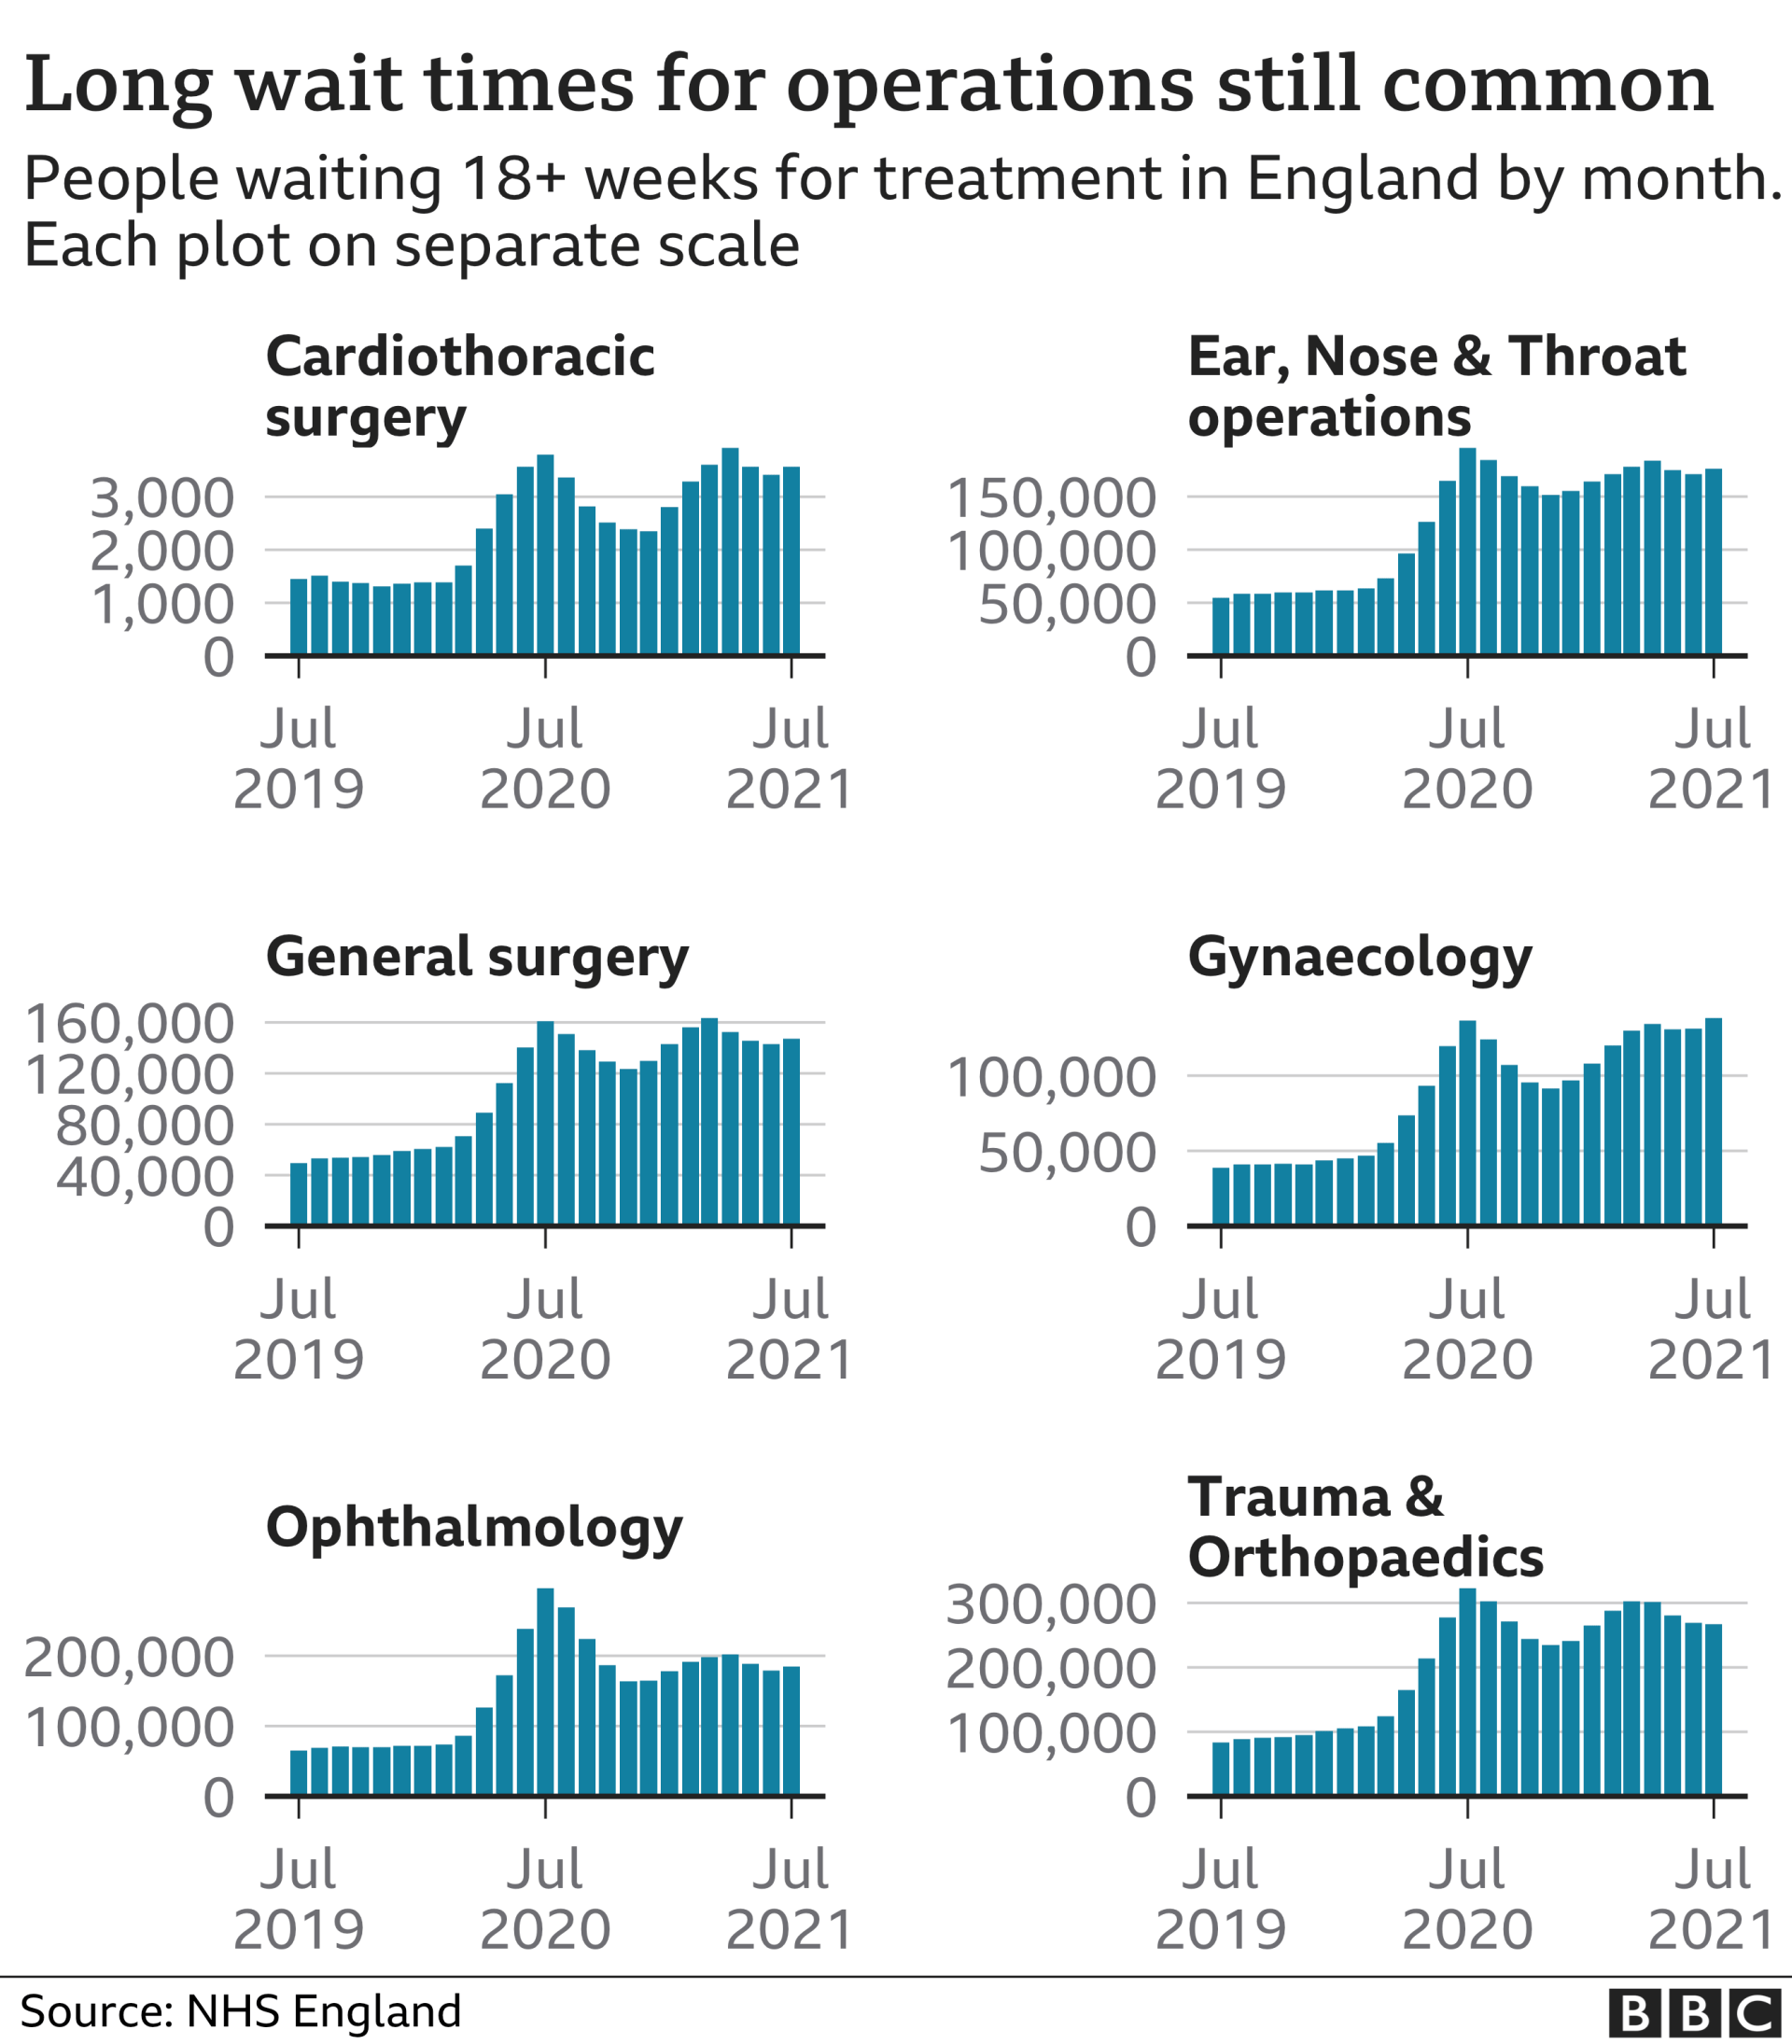 Graphs showing that long wait times for operations are still common, with rises across different types of surgery since July 2020 to July 2021